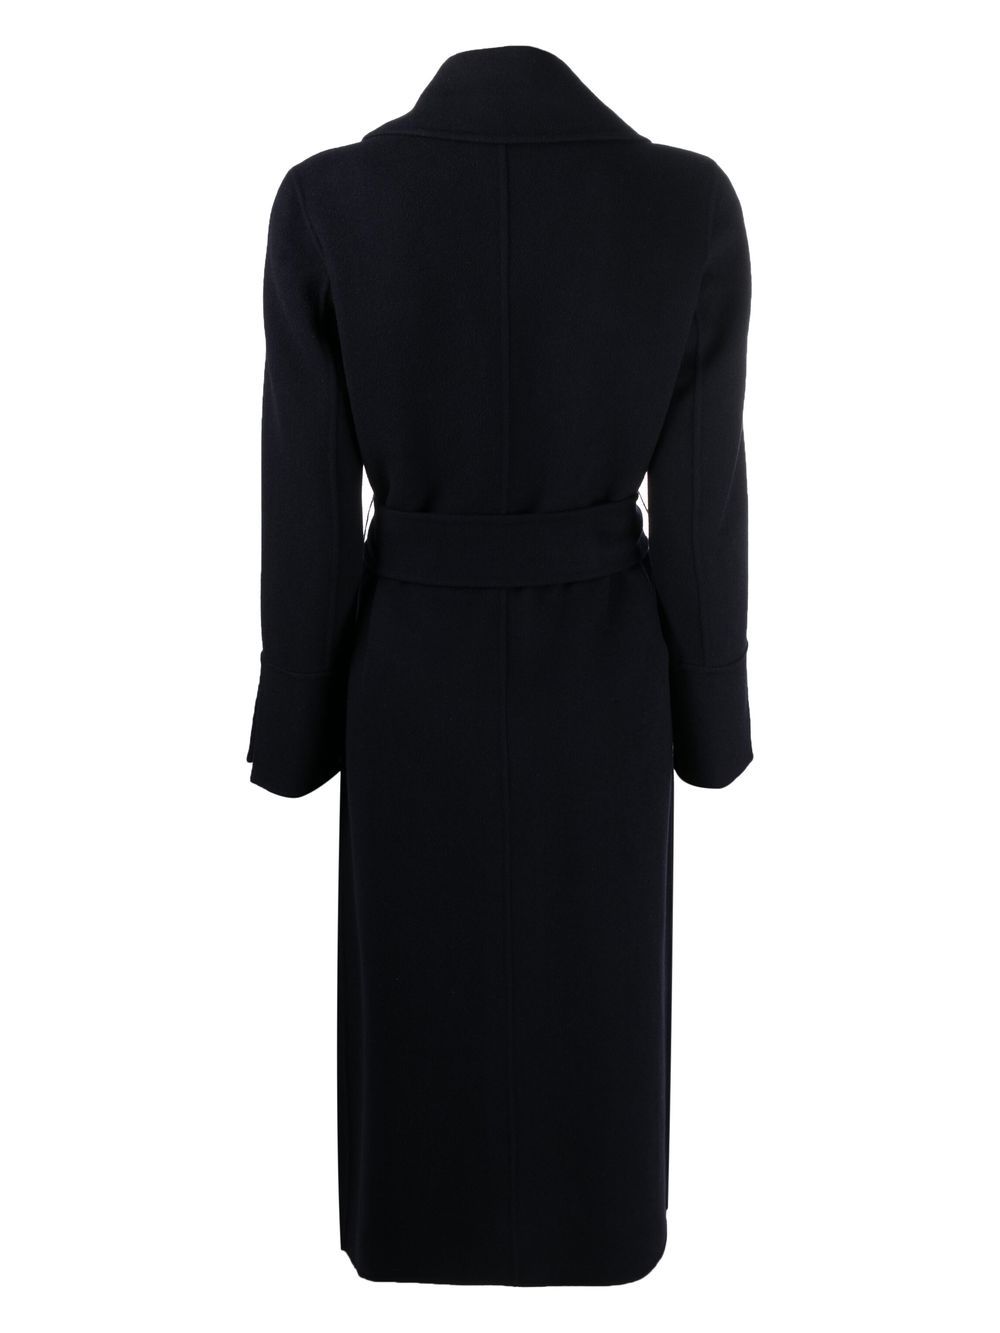 ALESSIA SANTI Belted double-breasted Wool Coat - Farfetch